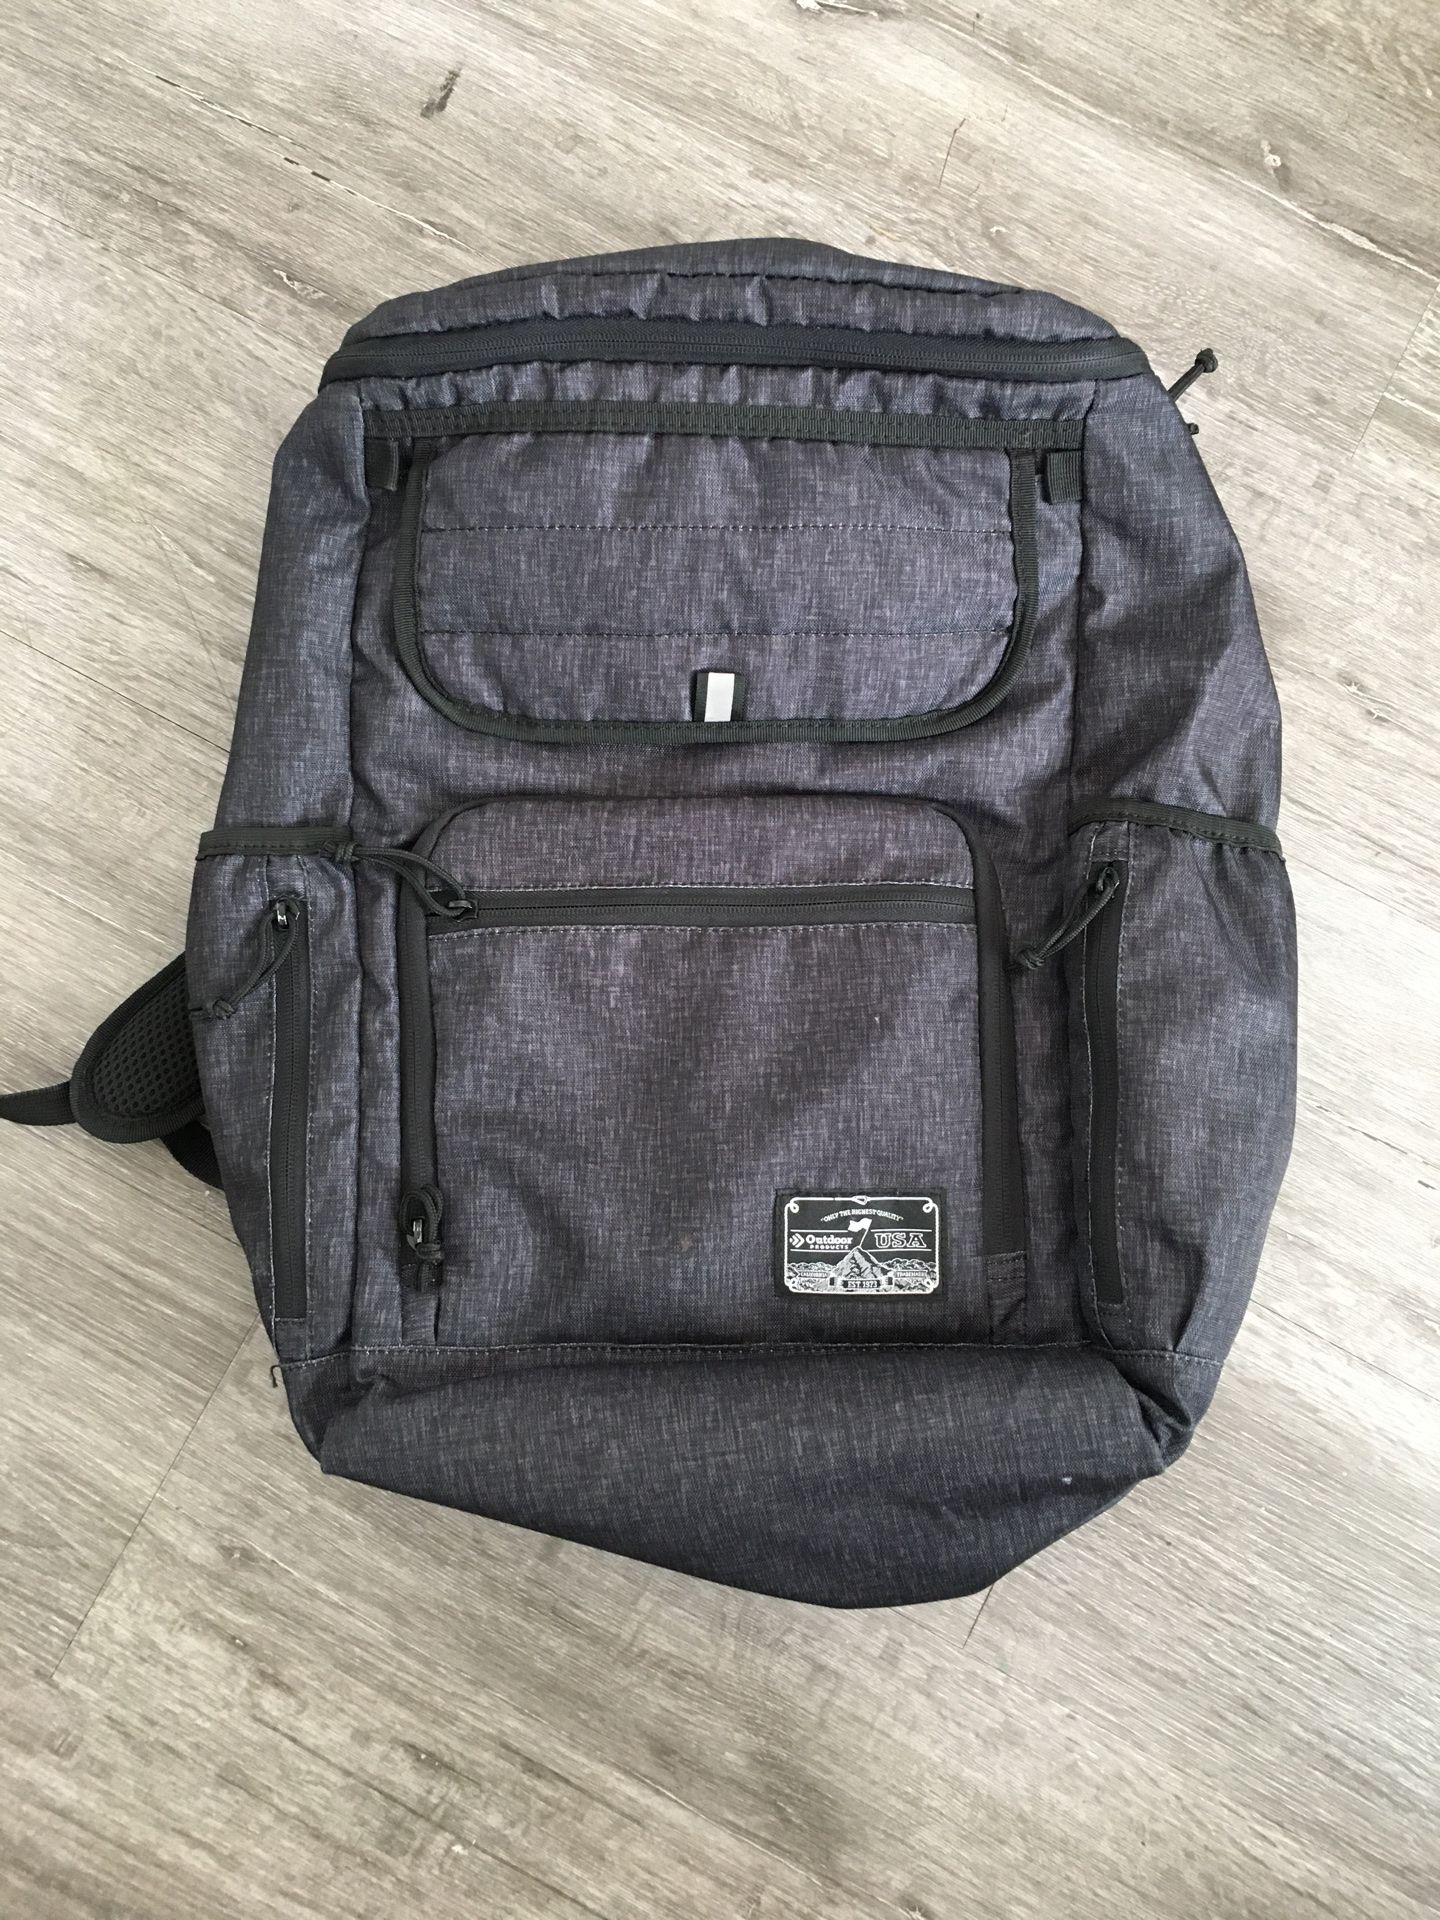 Outdoor products backpack/ hiking / travel